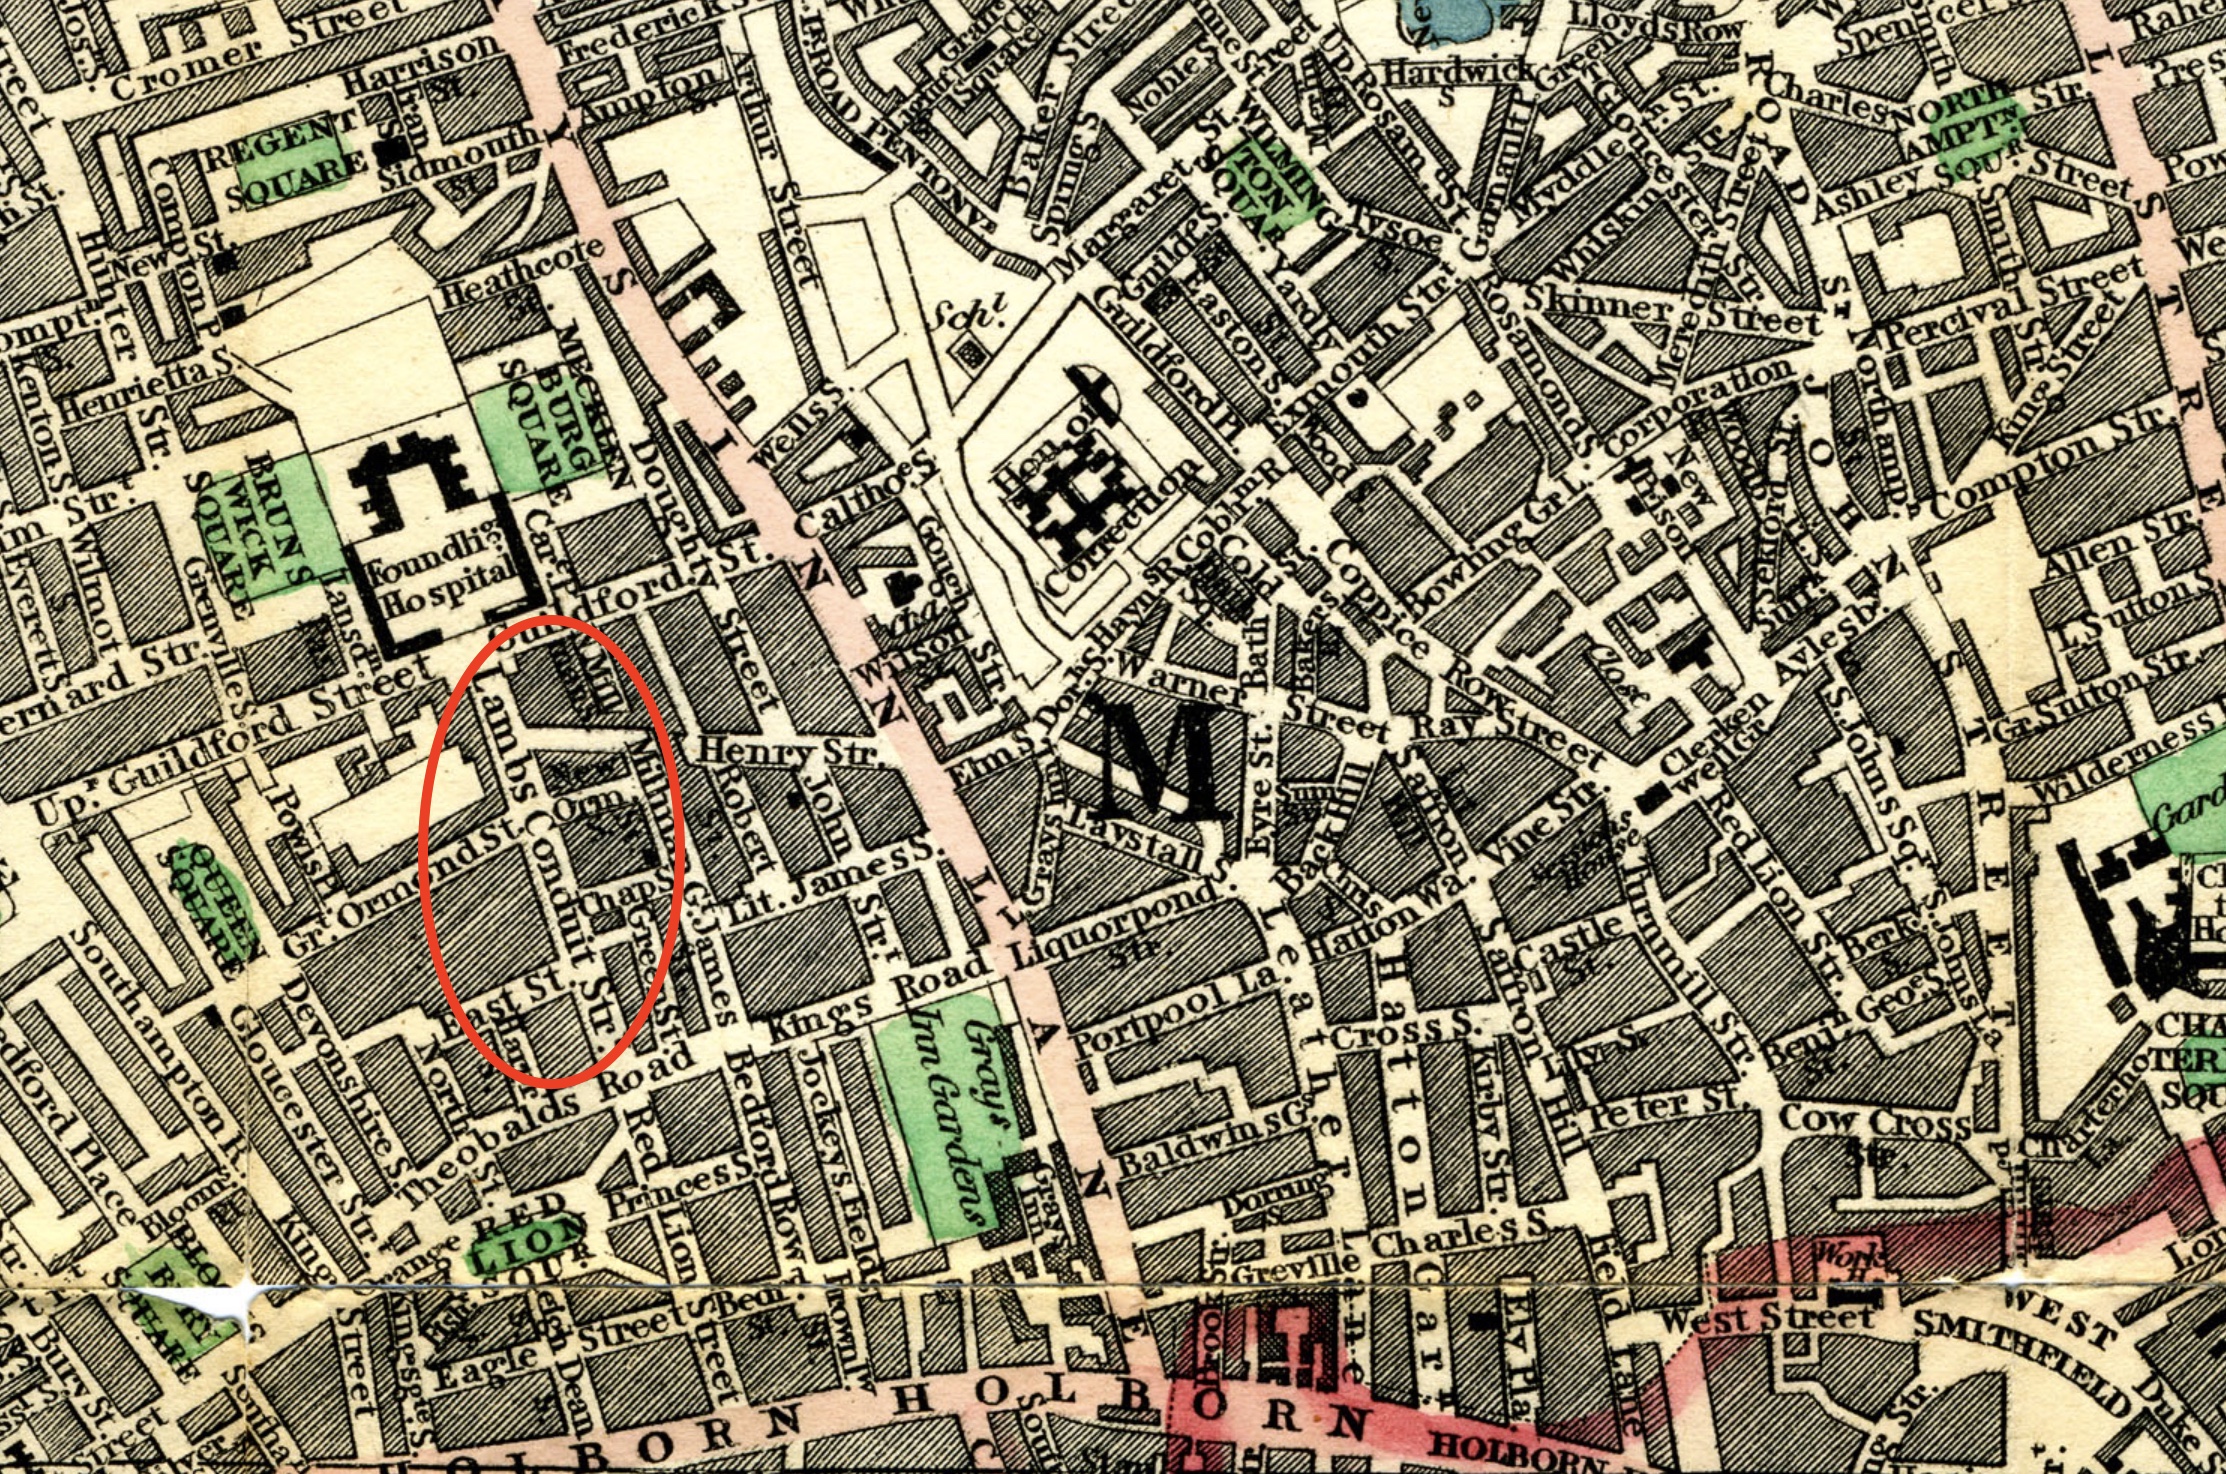 Lambs Conduit Street, Cary’s 1818 Map. Click to enlarge.